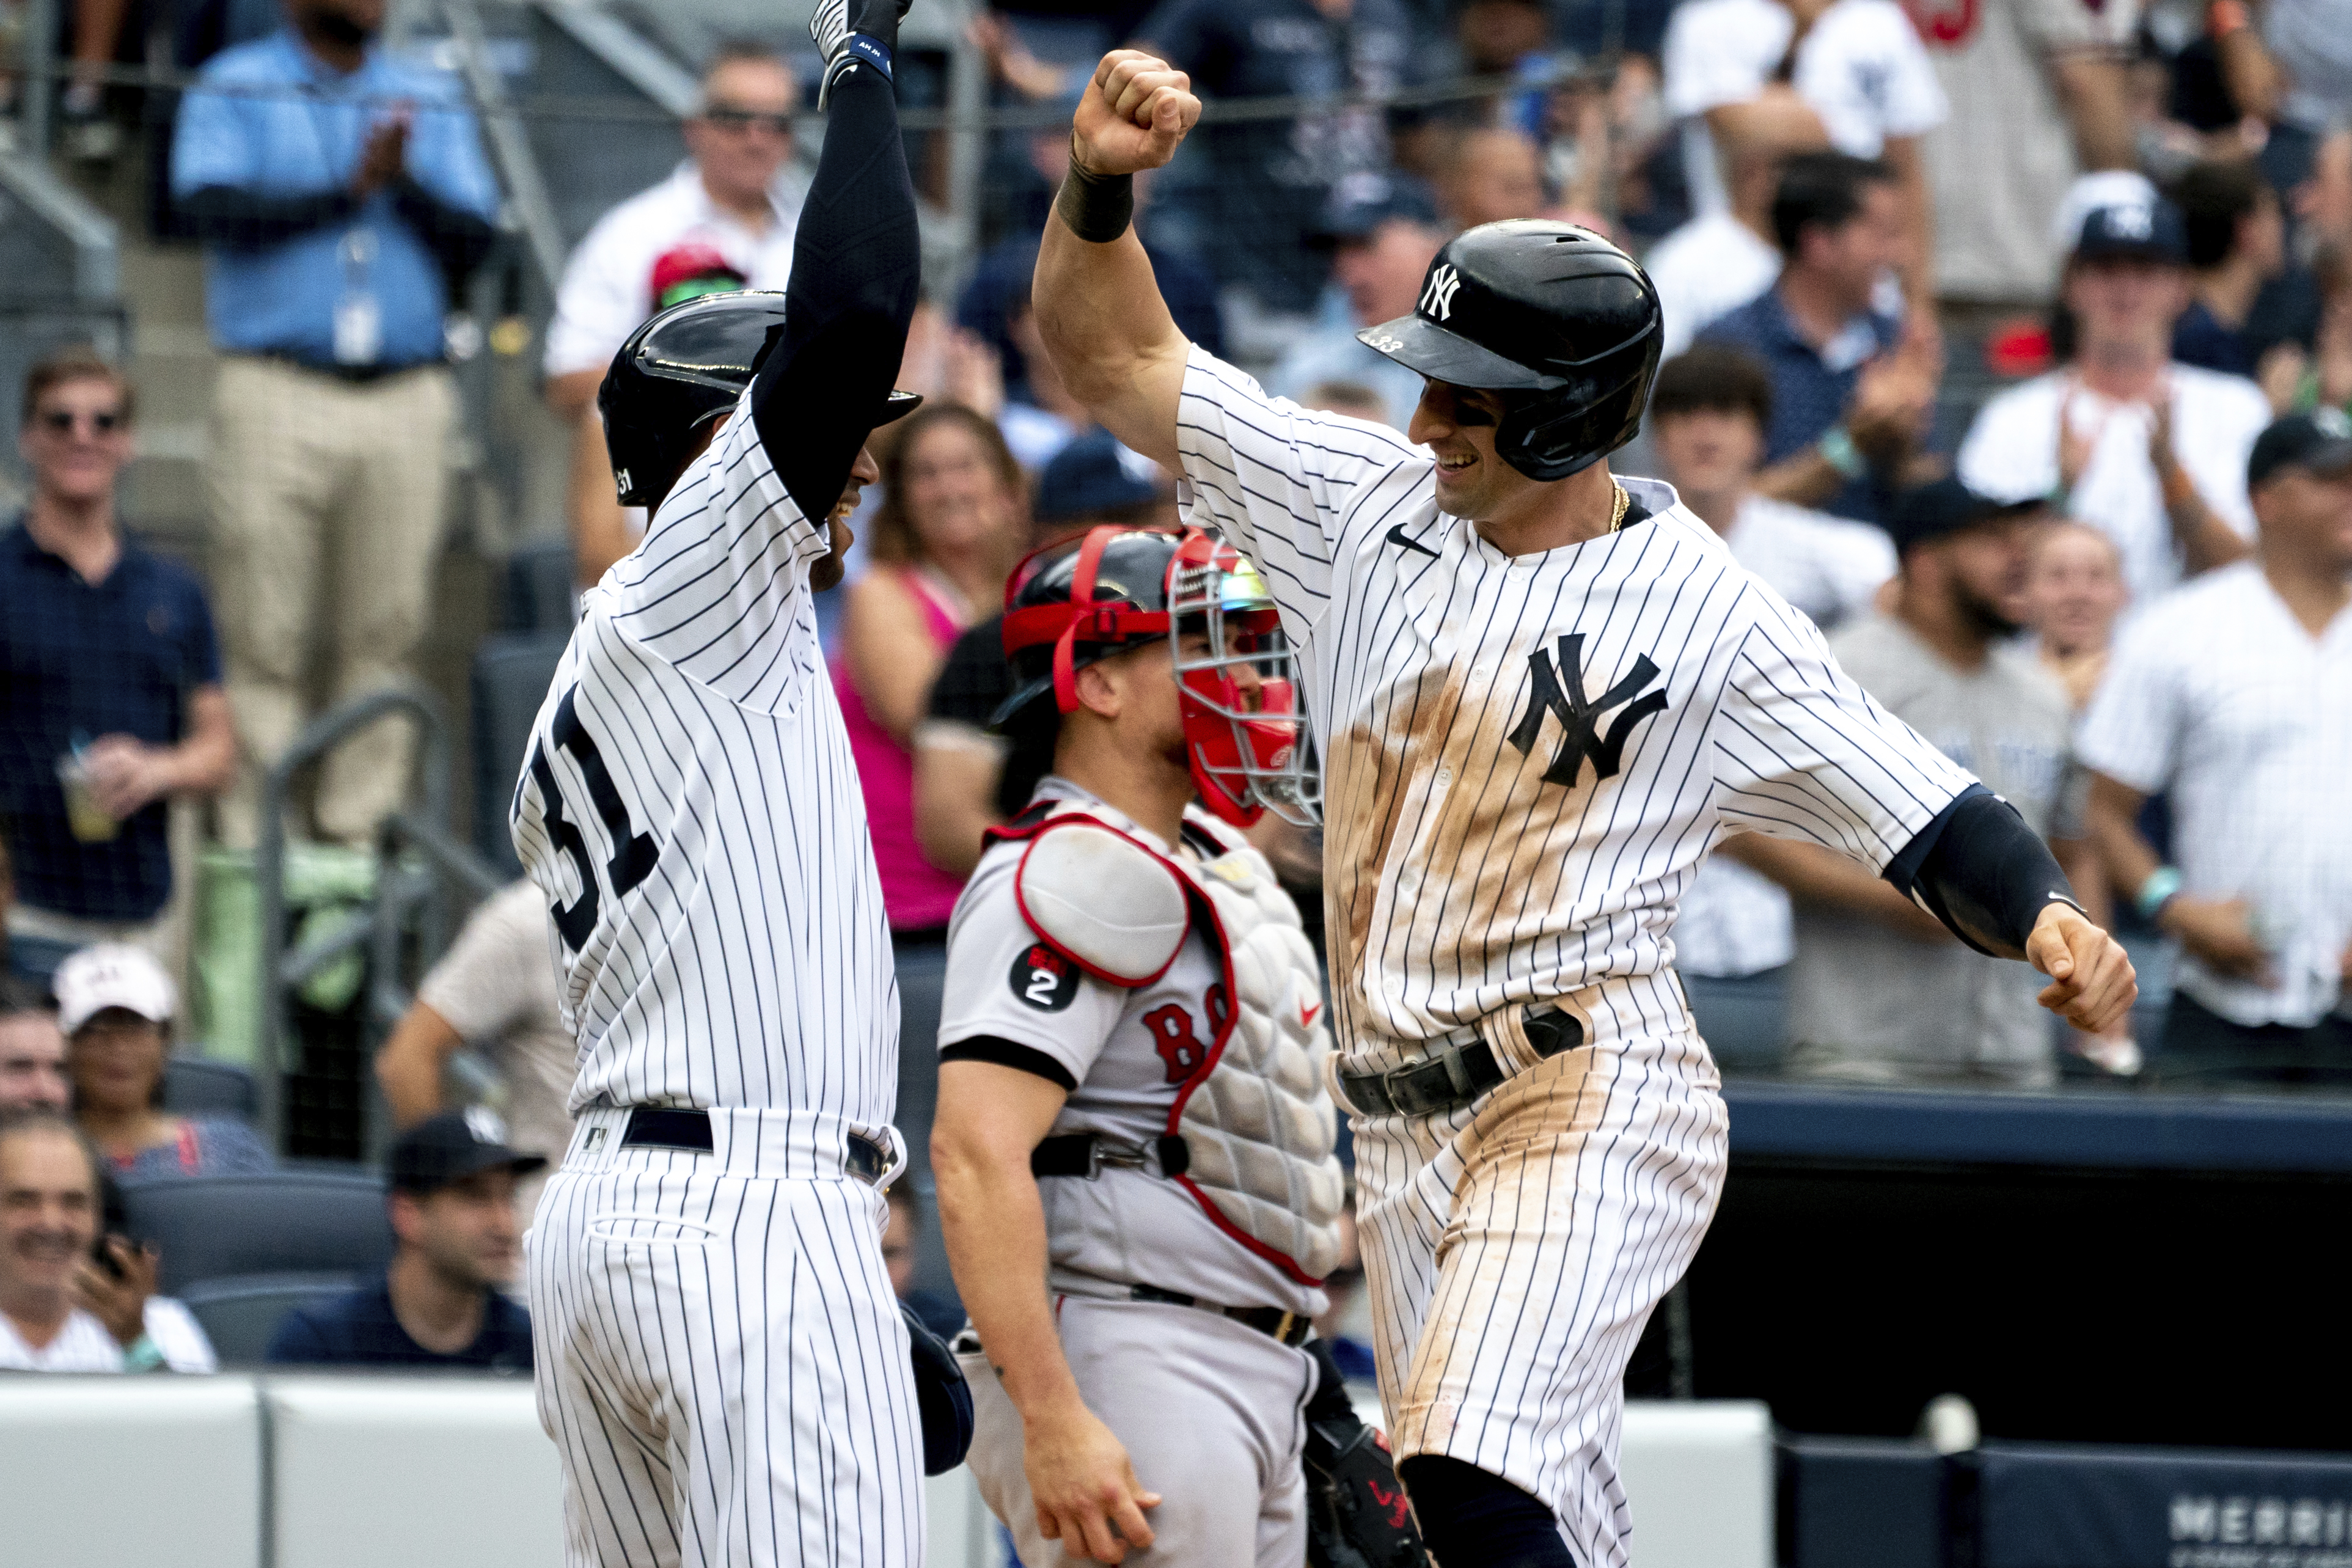 Red Sox walk off Yankees thanks to rookie named after Derek Jeter